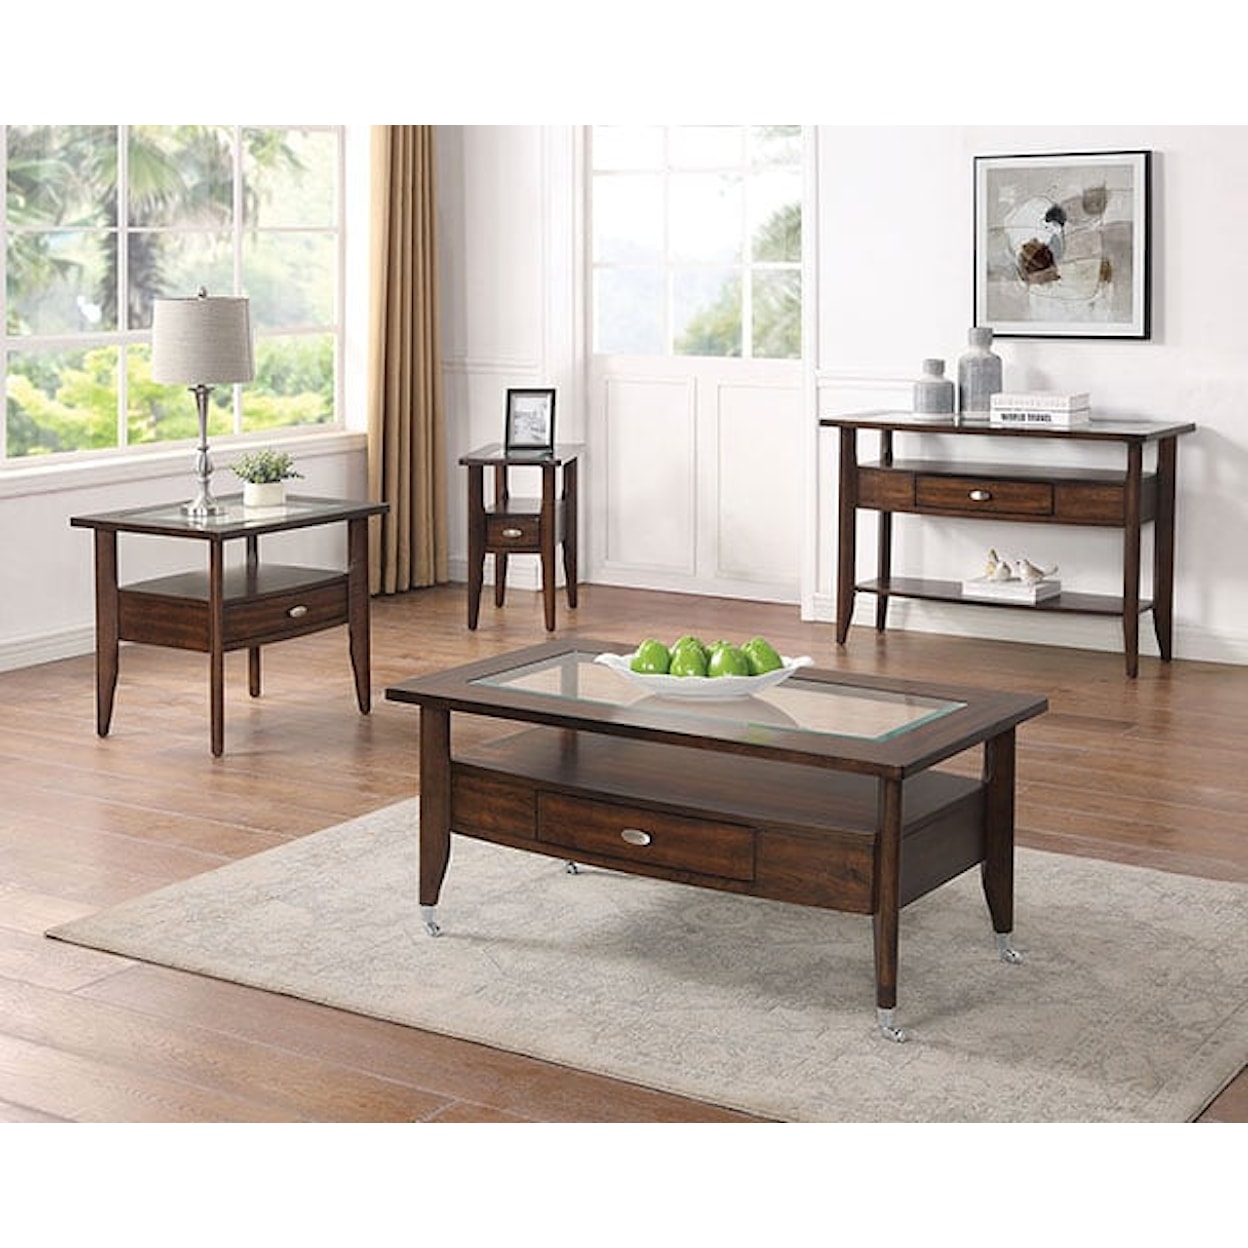 Furniture of America Riverdale Dark Walnut End Table with Glass Top